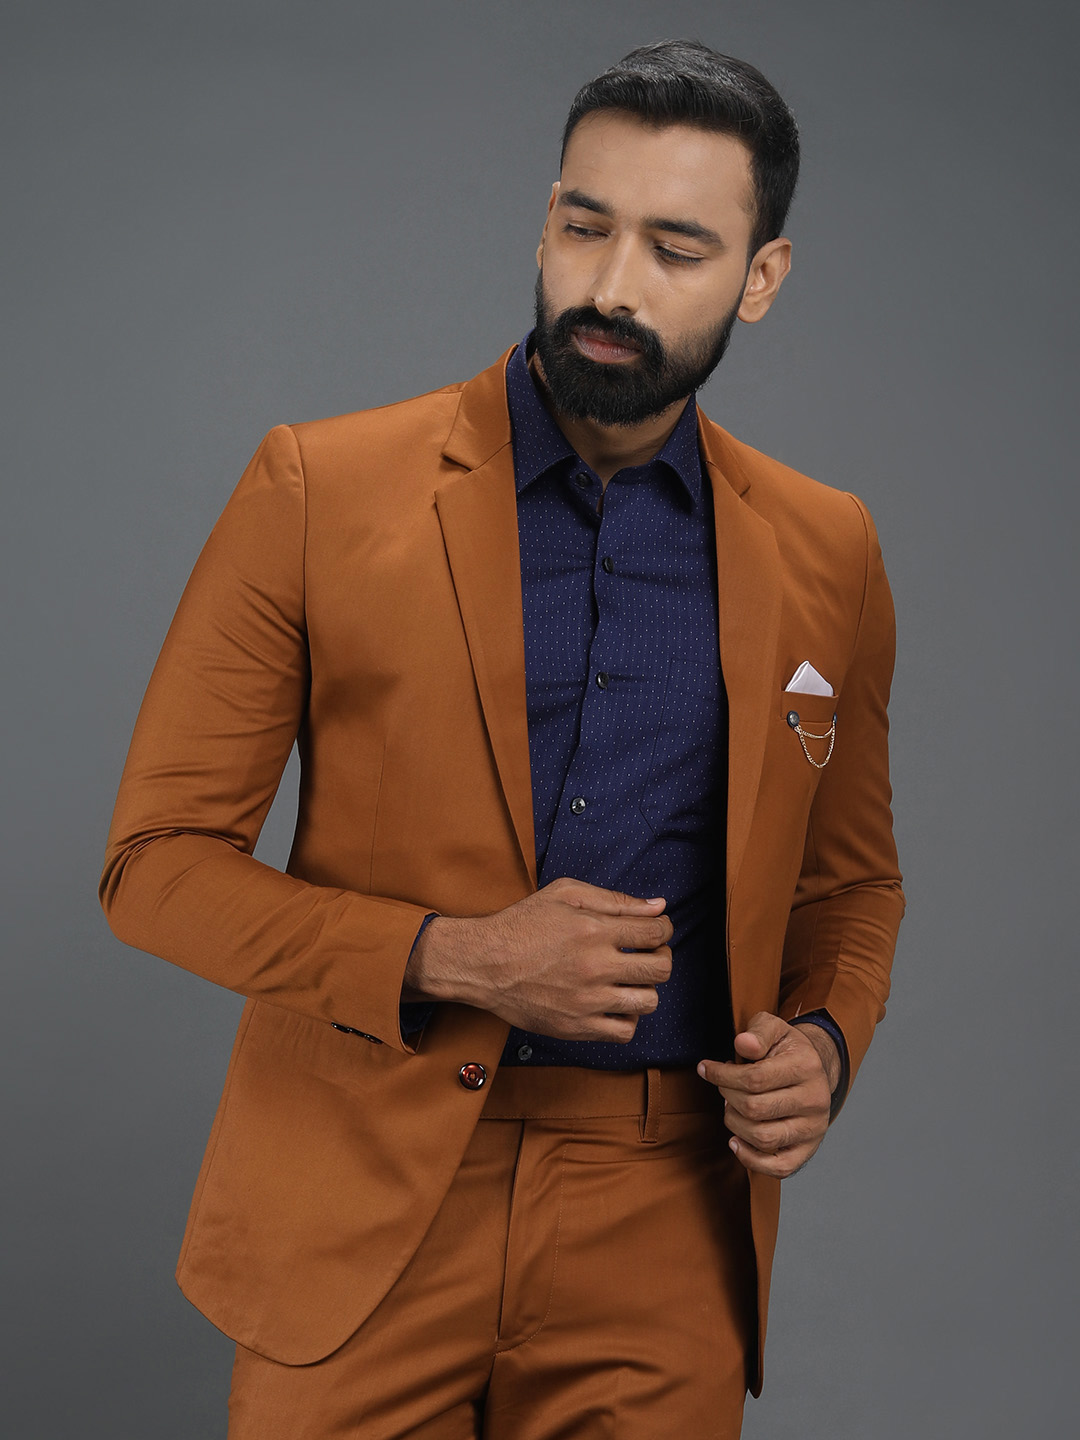 Rent/Buy Burnt Orange 2 Piece Suit | Home Trial | Free Delivery I Bought A New Suit For